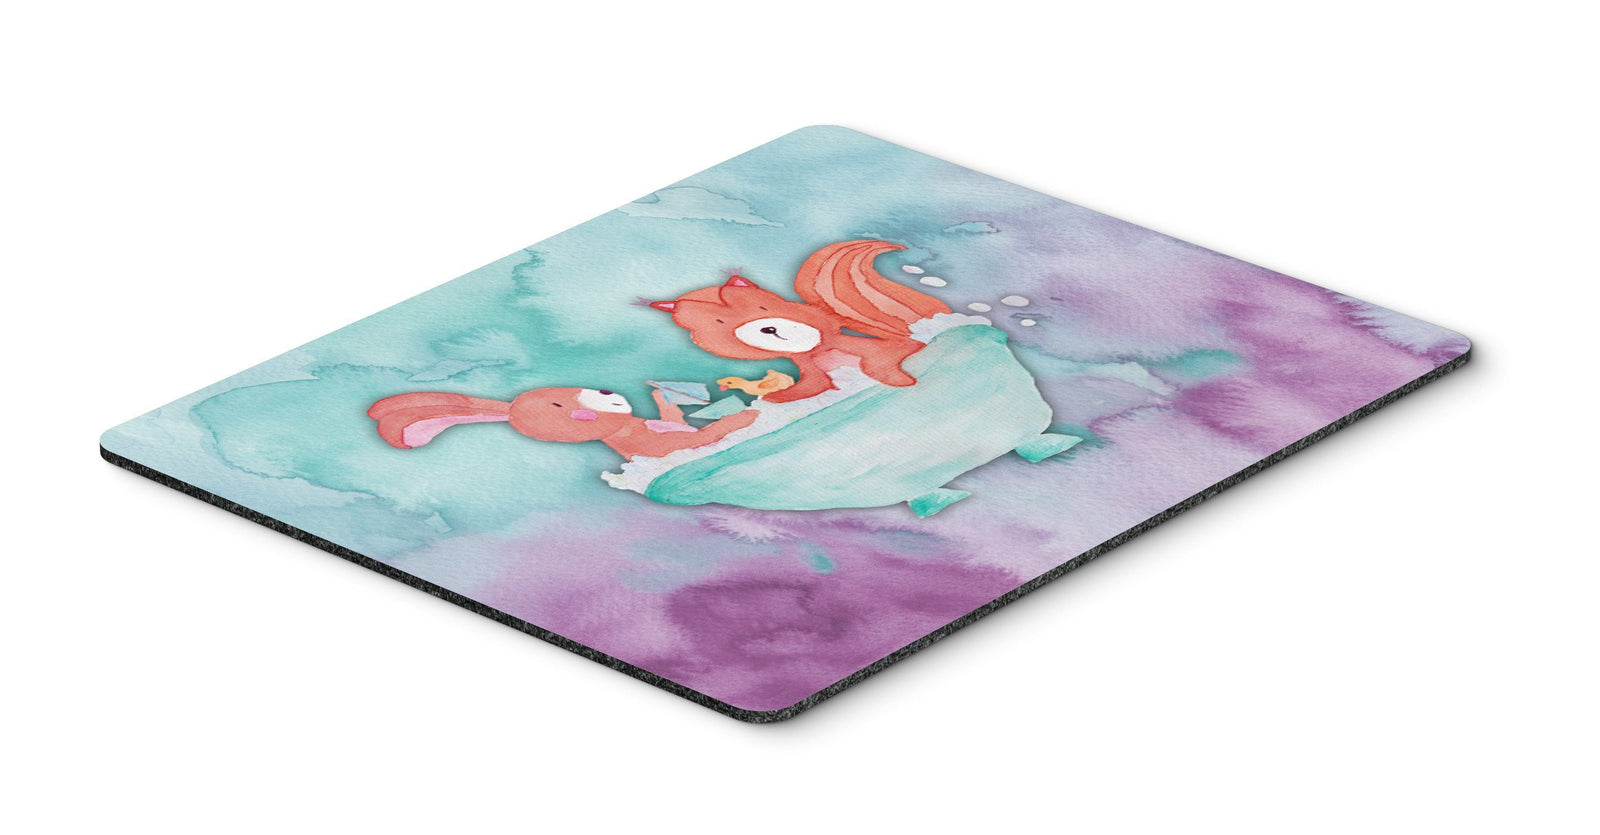 Rabbit and Squirrel Bathing Watercolor Mouse Pad, Hot Pad or Trivet BB7348MP by Caroline's Treasures